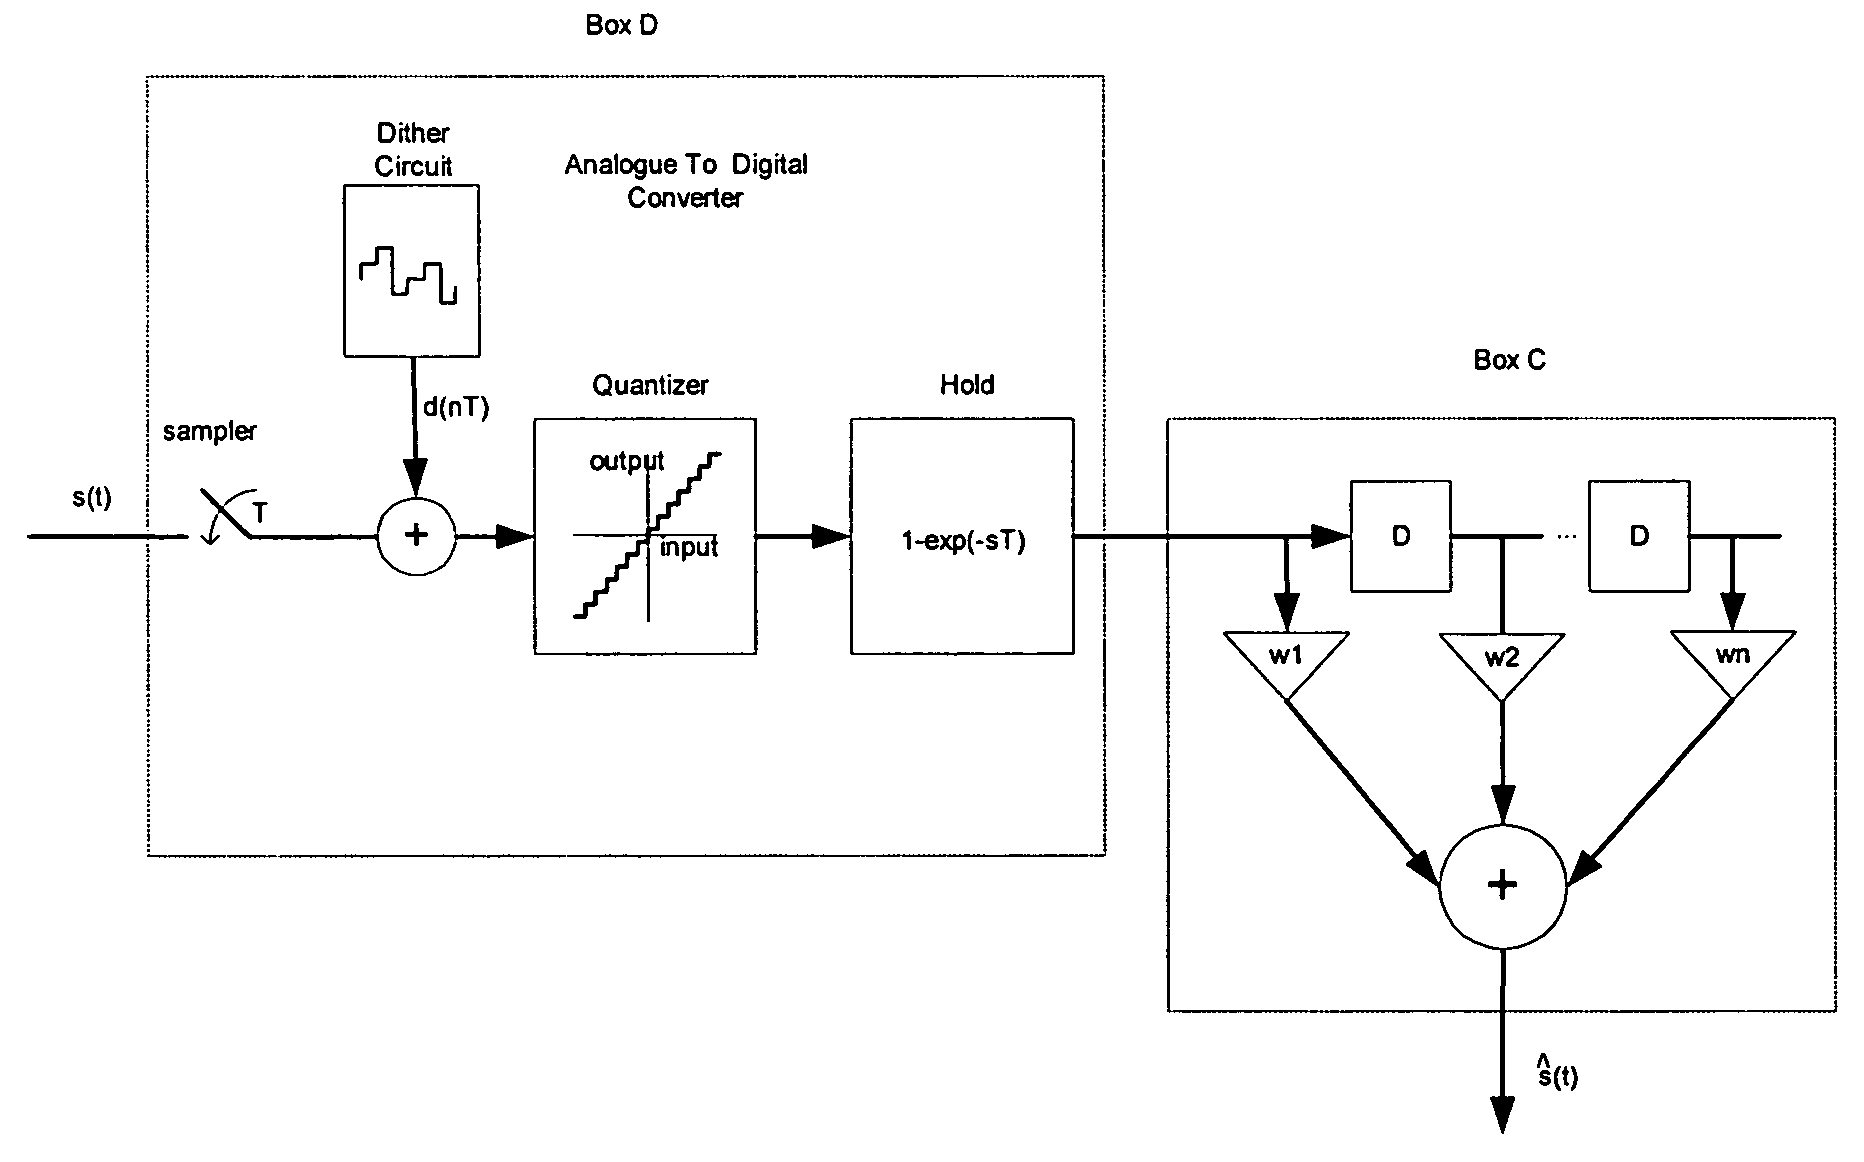 System and method for improving performance of an analog to digital converter